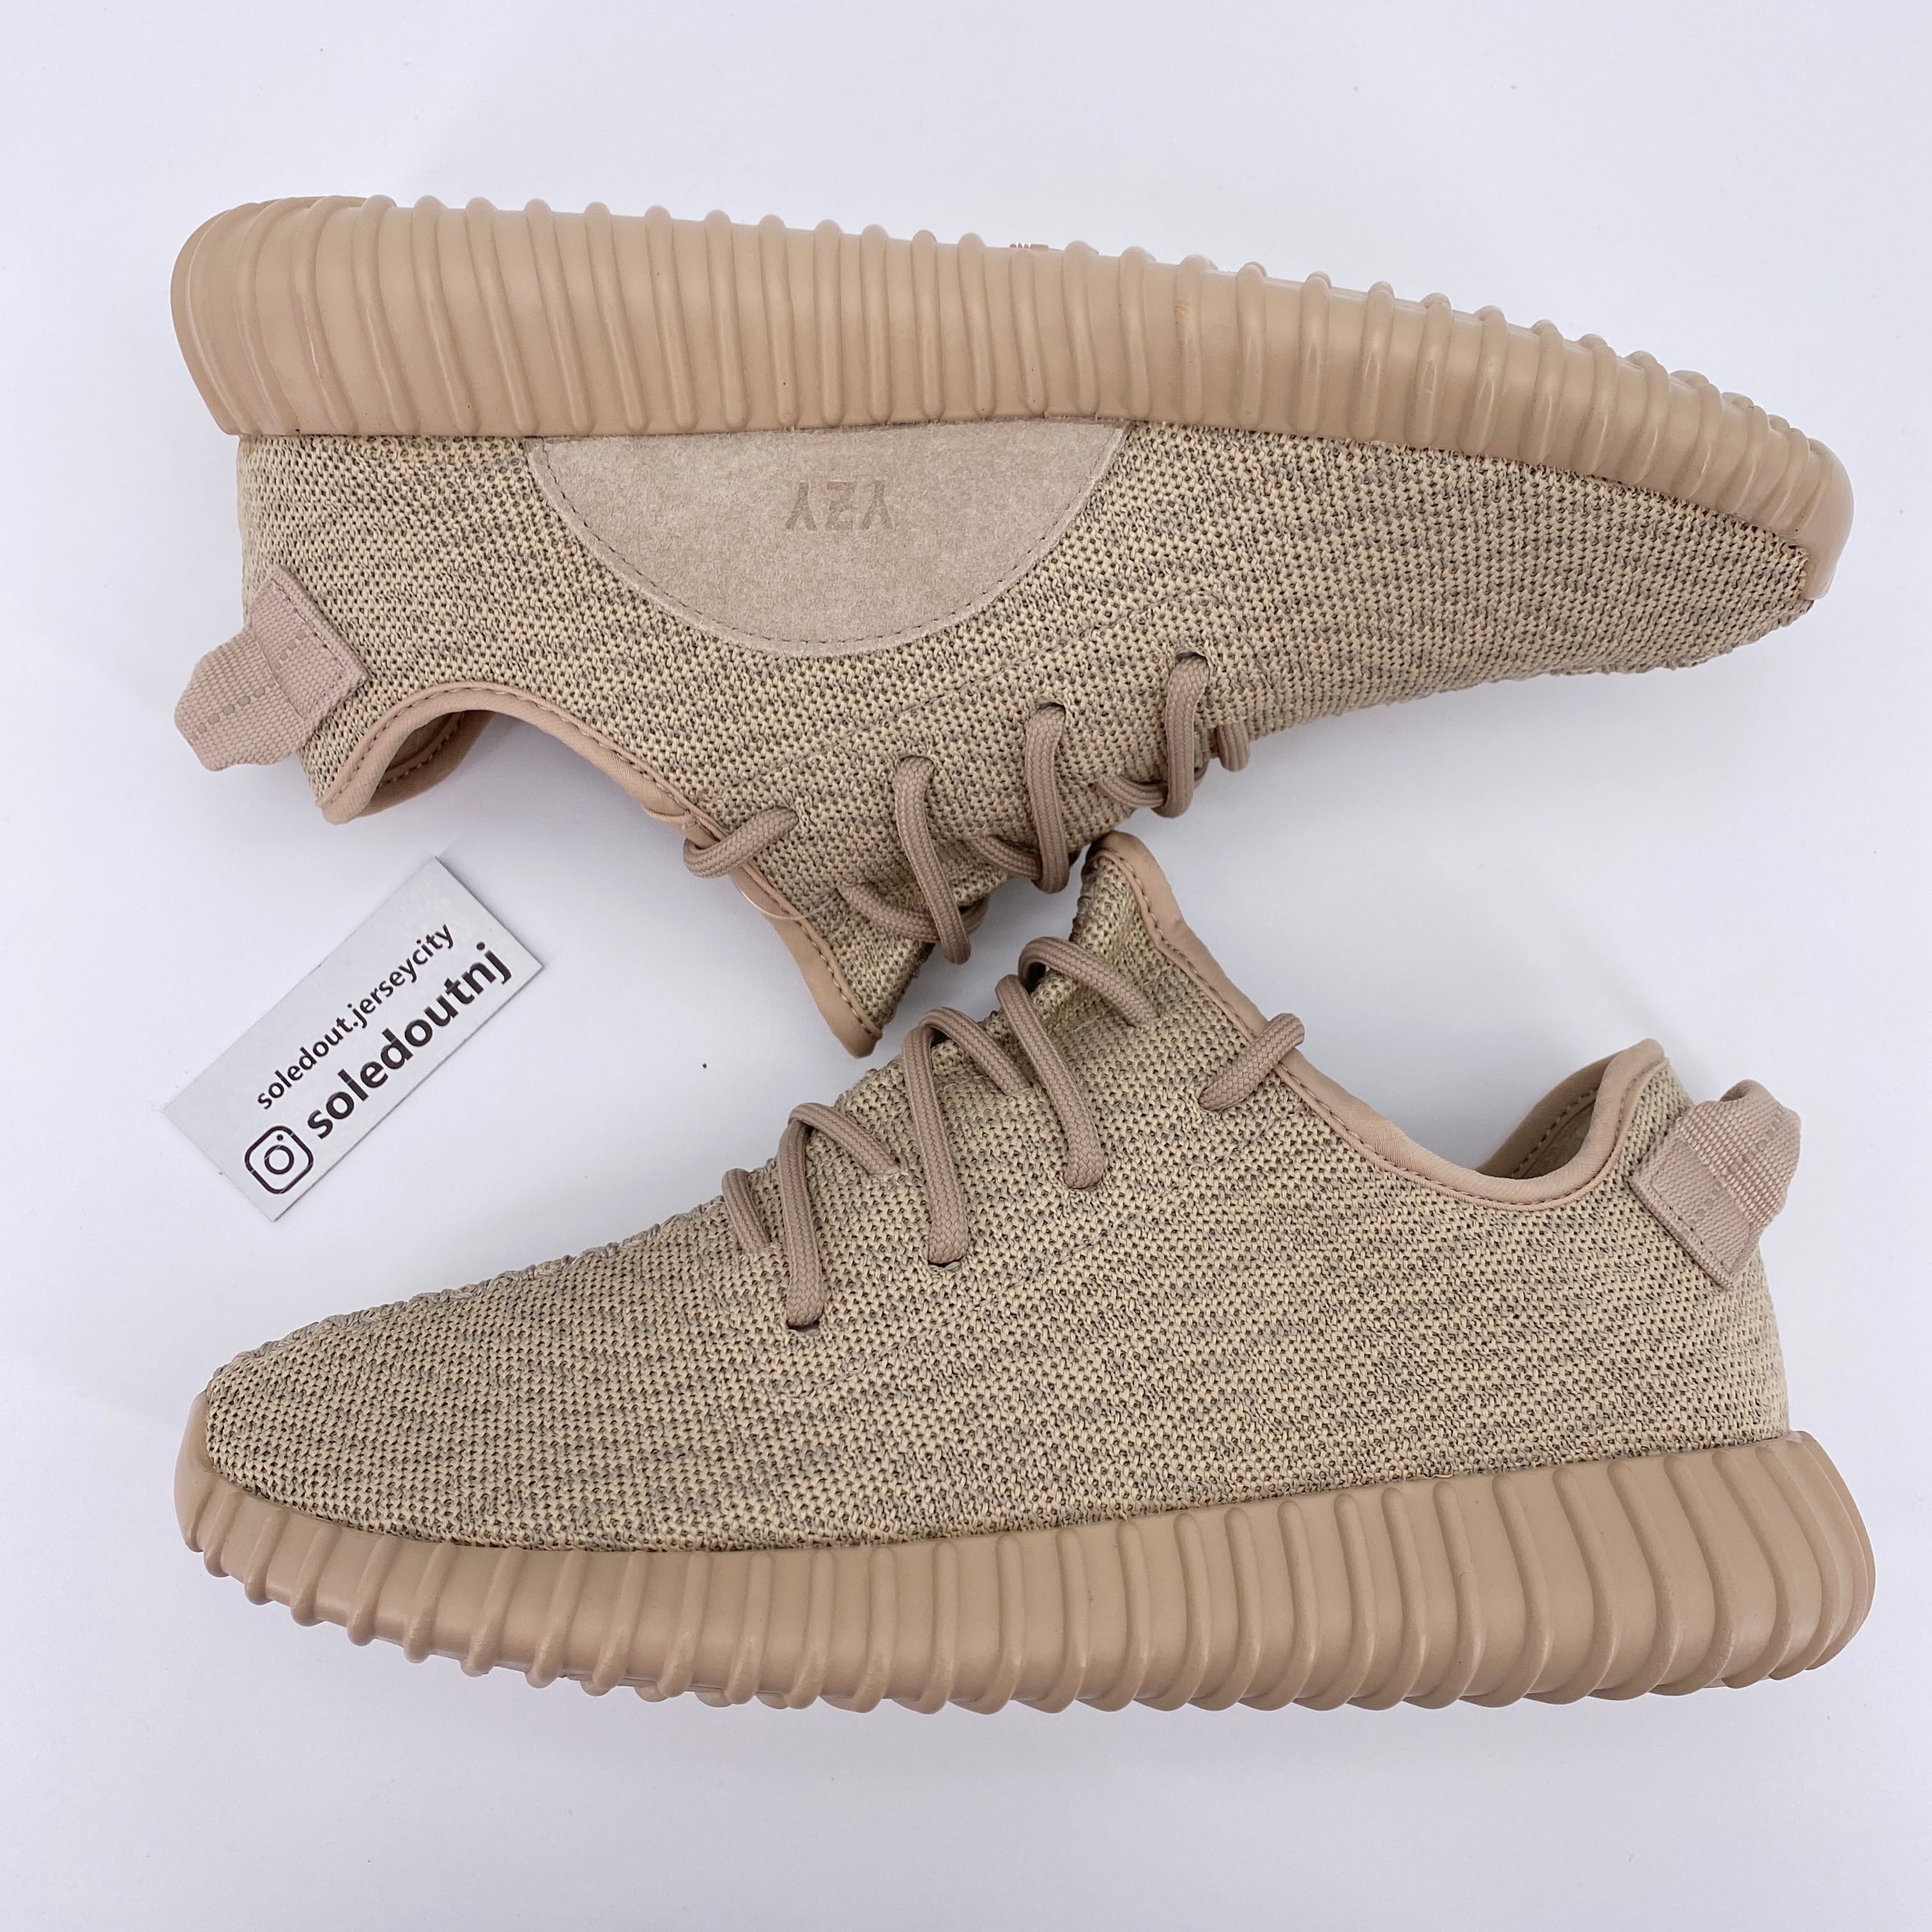 Yeezy 350 &quot;Oxford Tan&quot; 2015 New Size 7.5